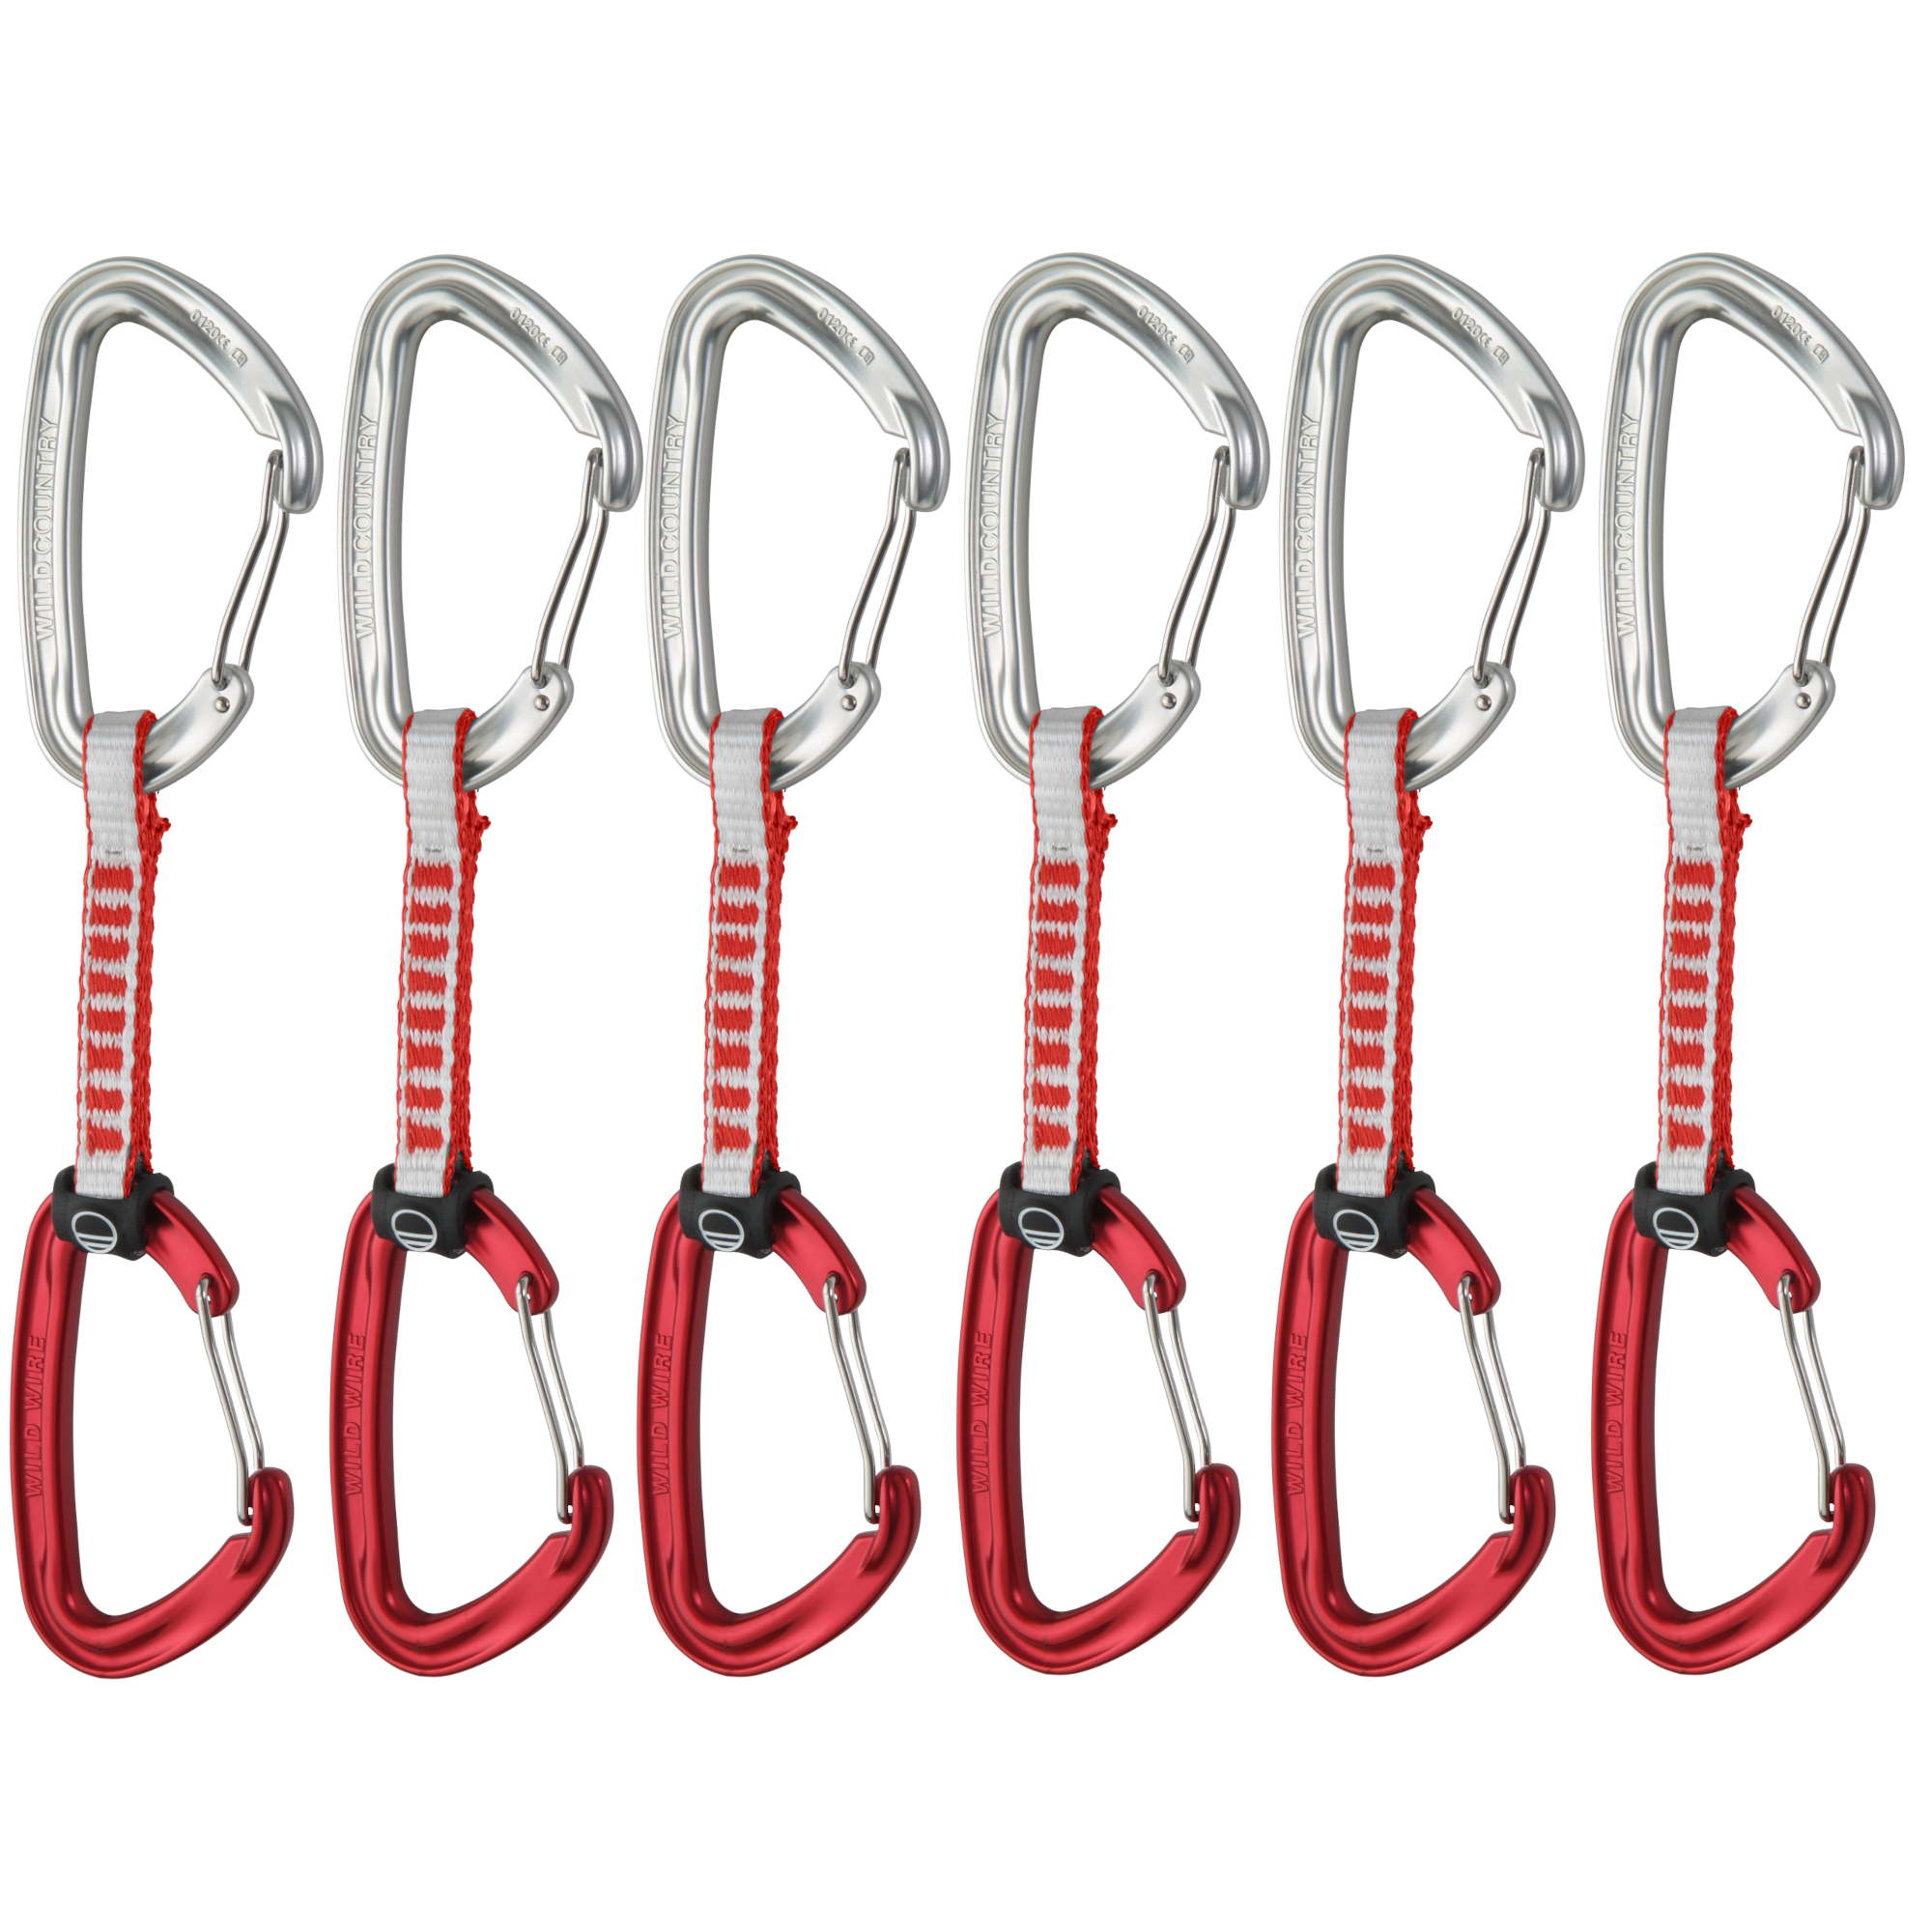 Wild Country Wildwire Quickdraw 6x10cm Pack red